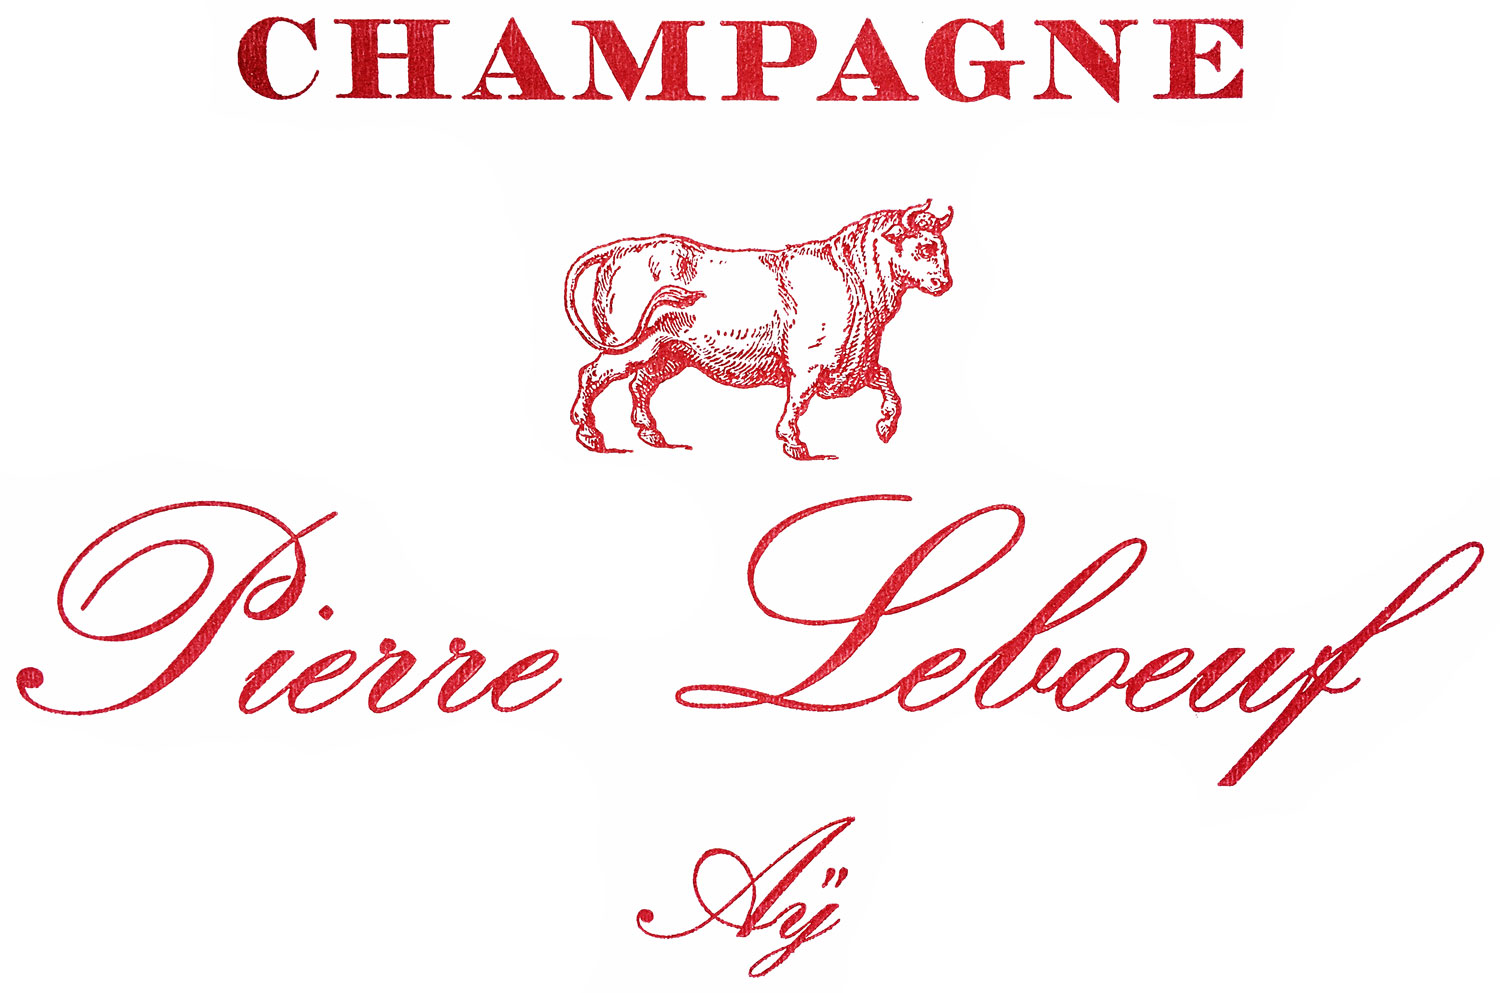 Champagne Pierre Leboeuf